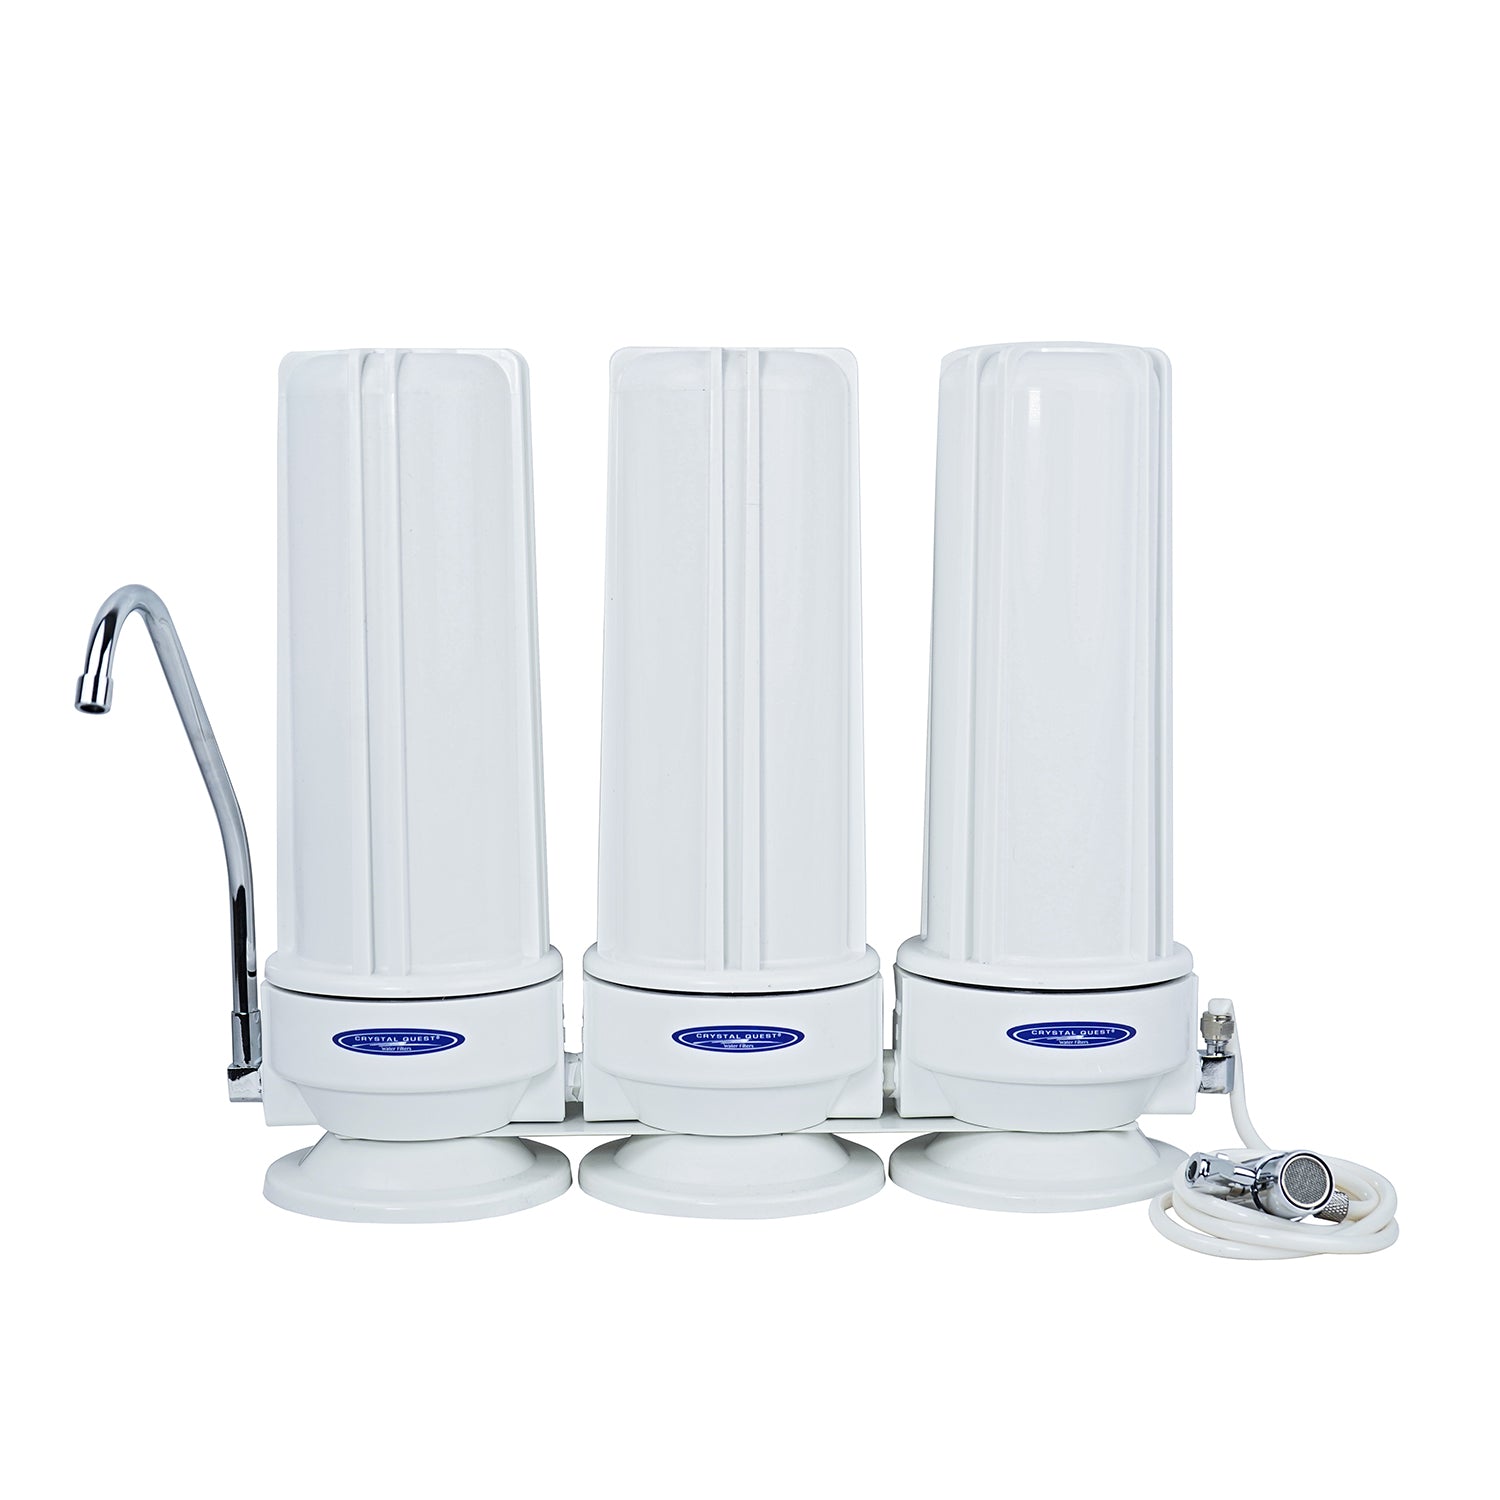 CleanWater® 2 Gallon Countertop Filtration System